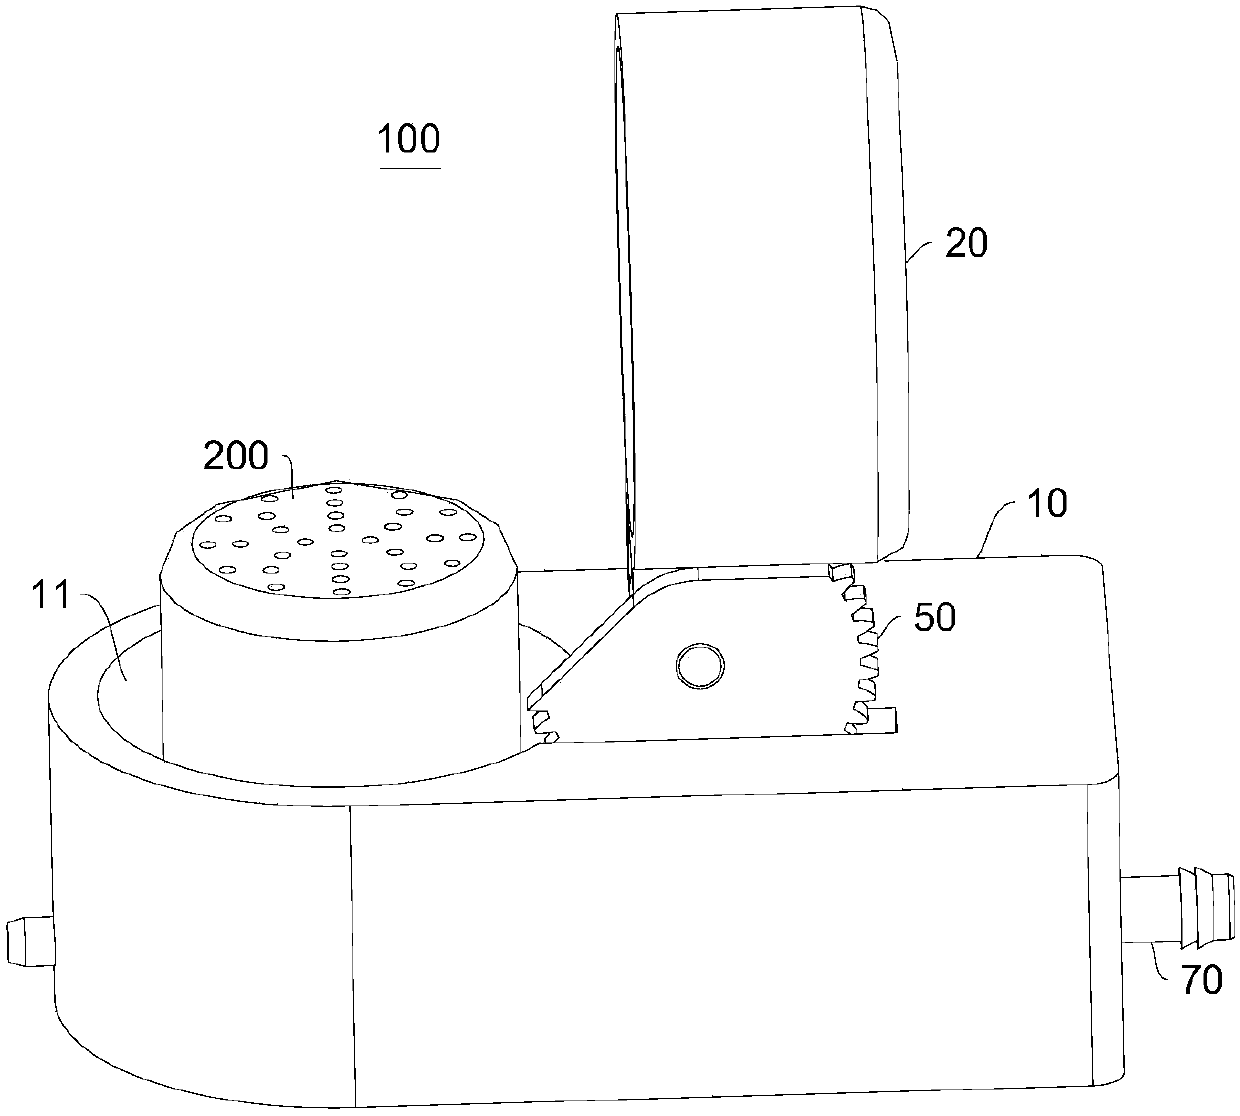 Protection device and sensor structure